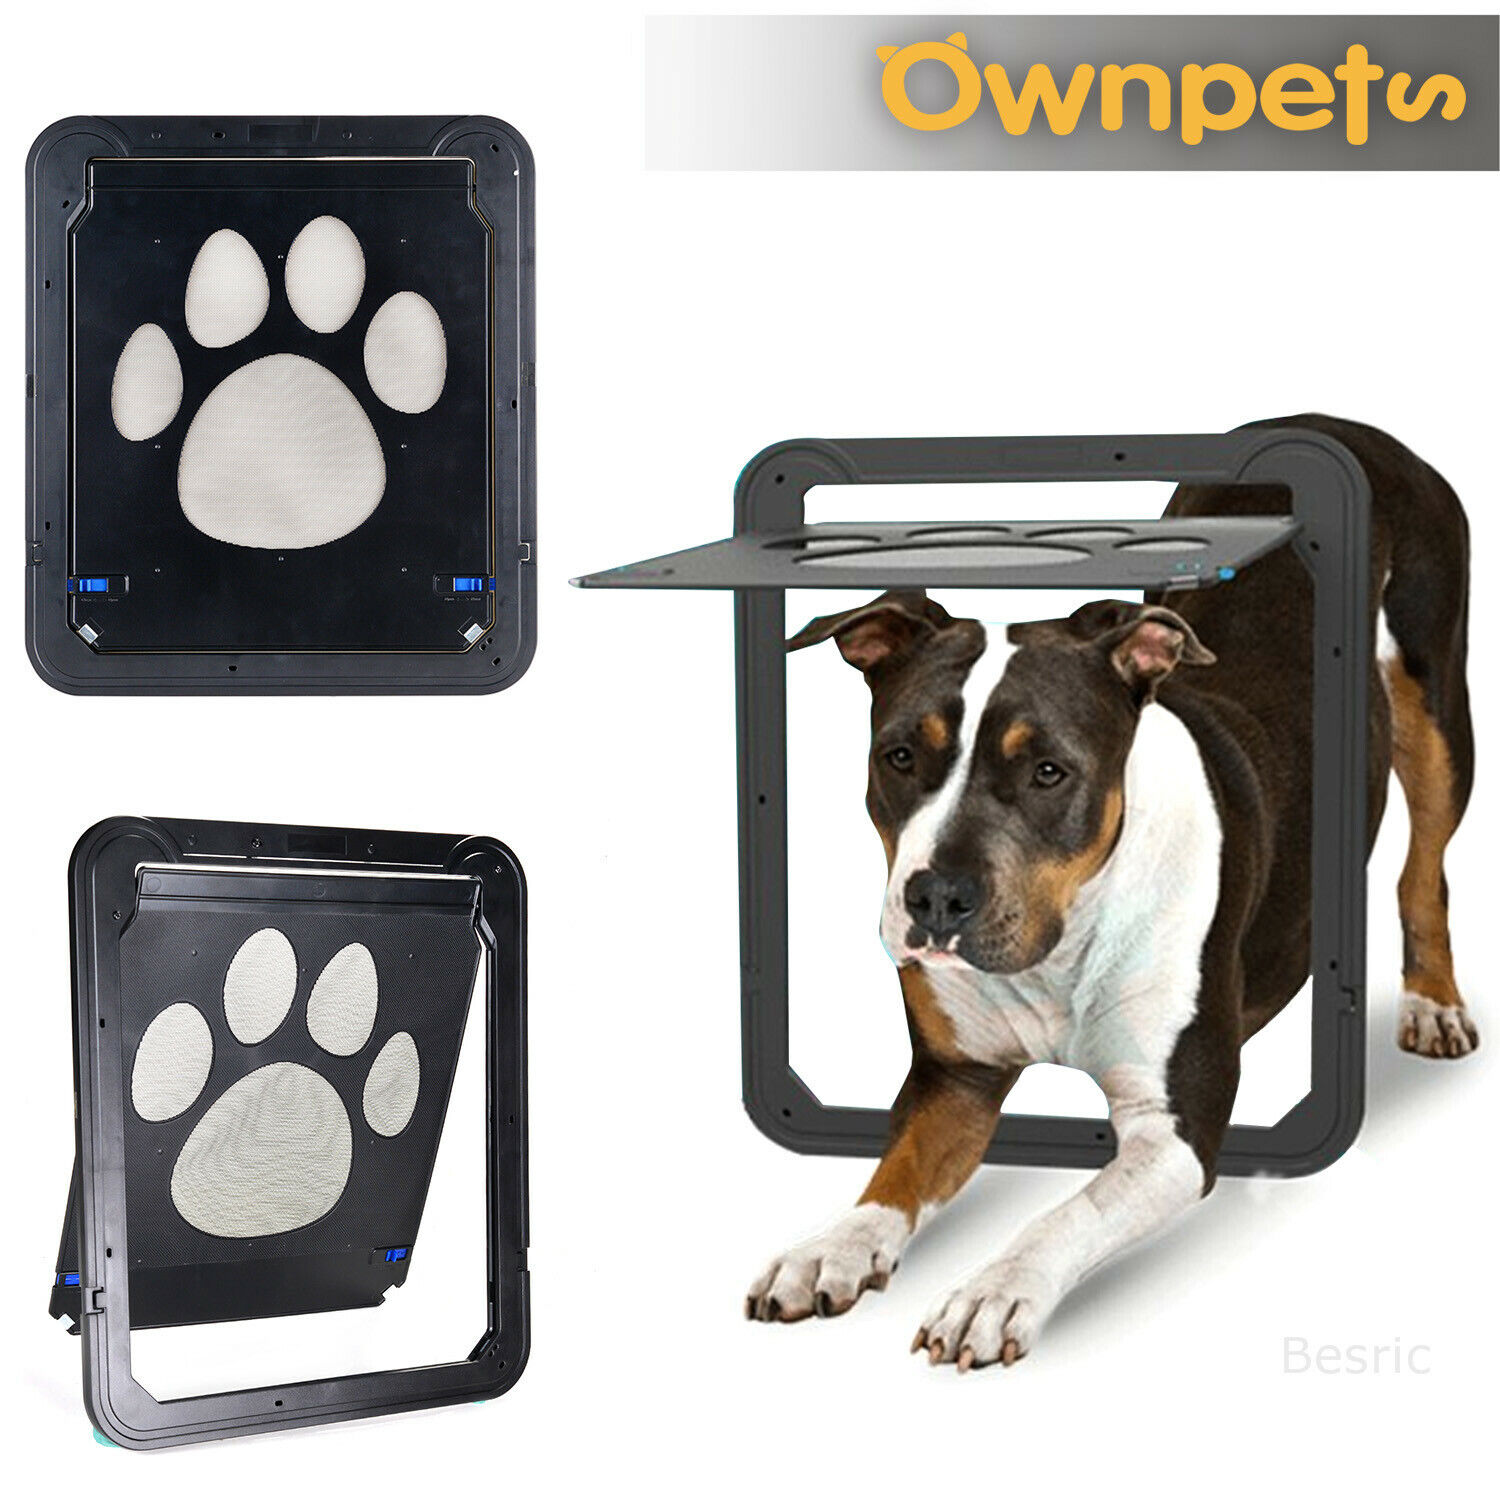 Dog Cat Magnetic Flap Screen Door Pet Puppy Magnetic Lockable Entry Gate Frame